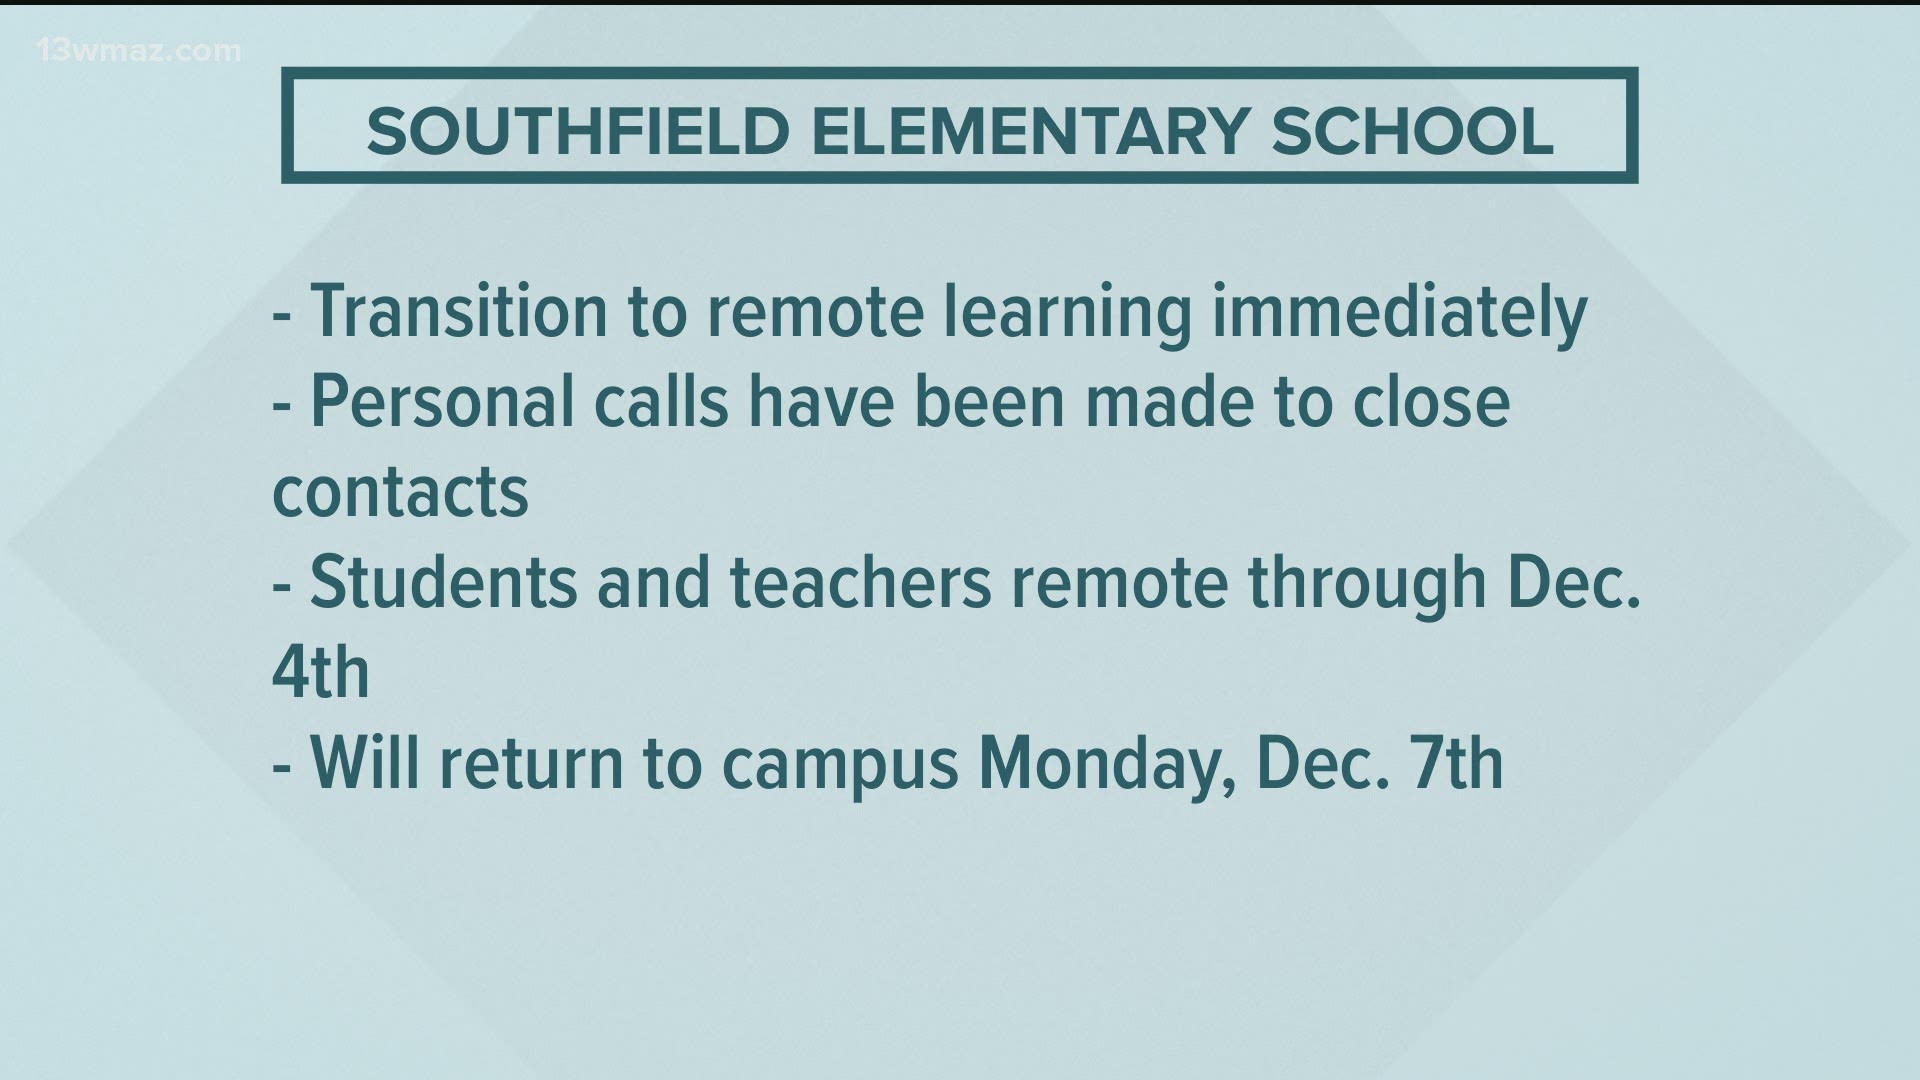 Students will return to in-person learning on December 7.